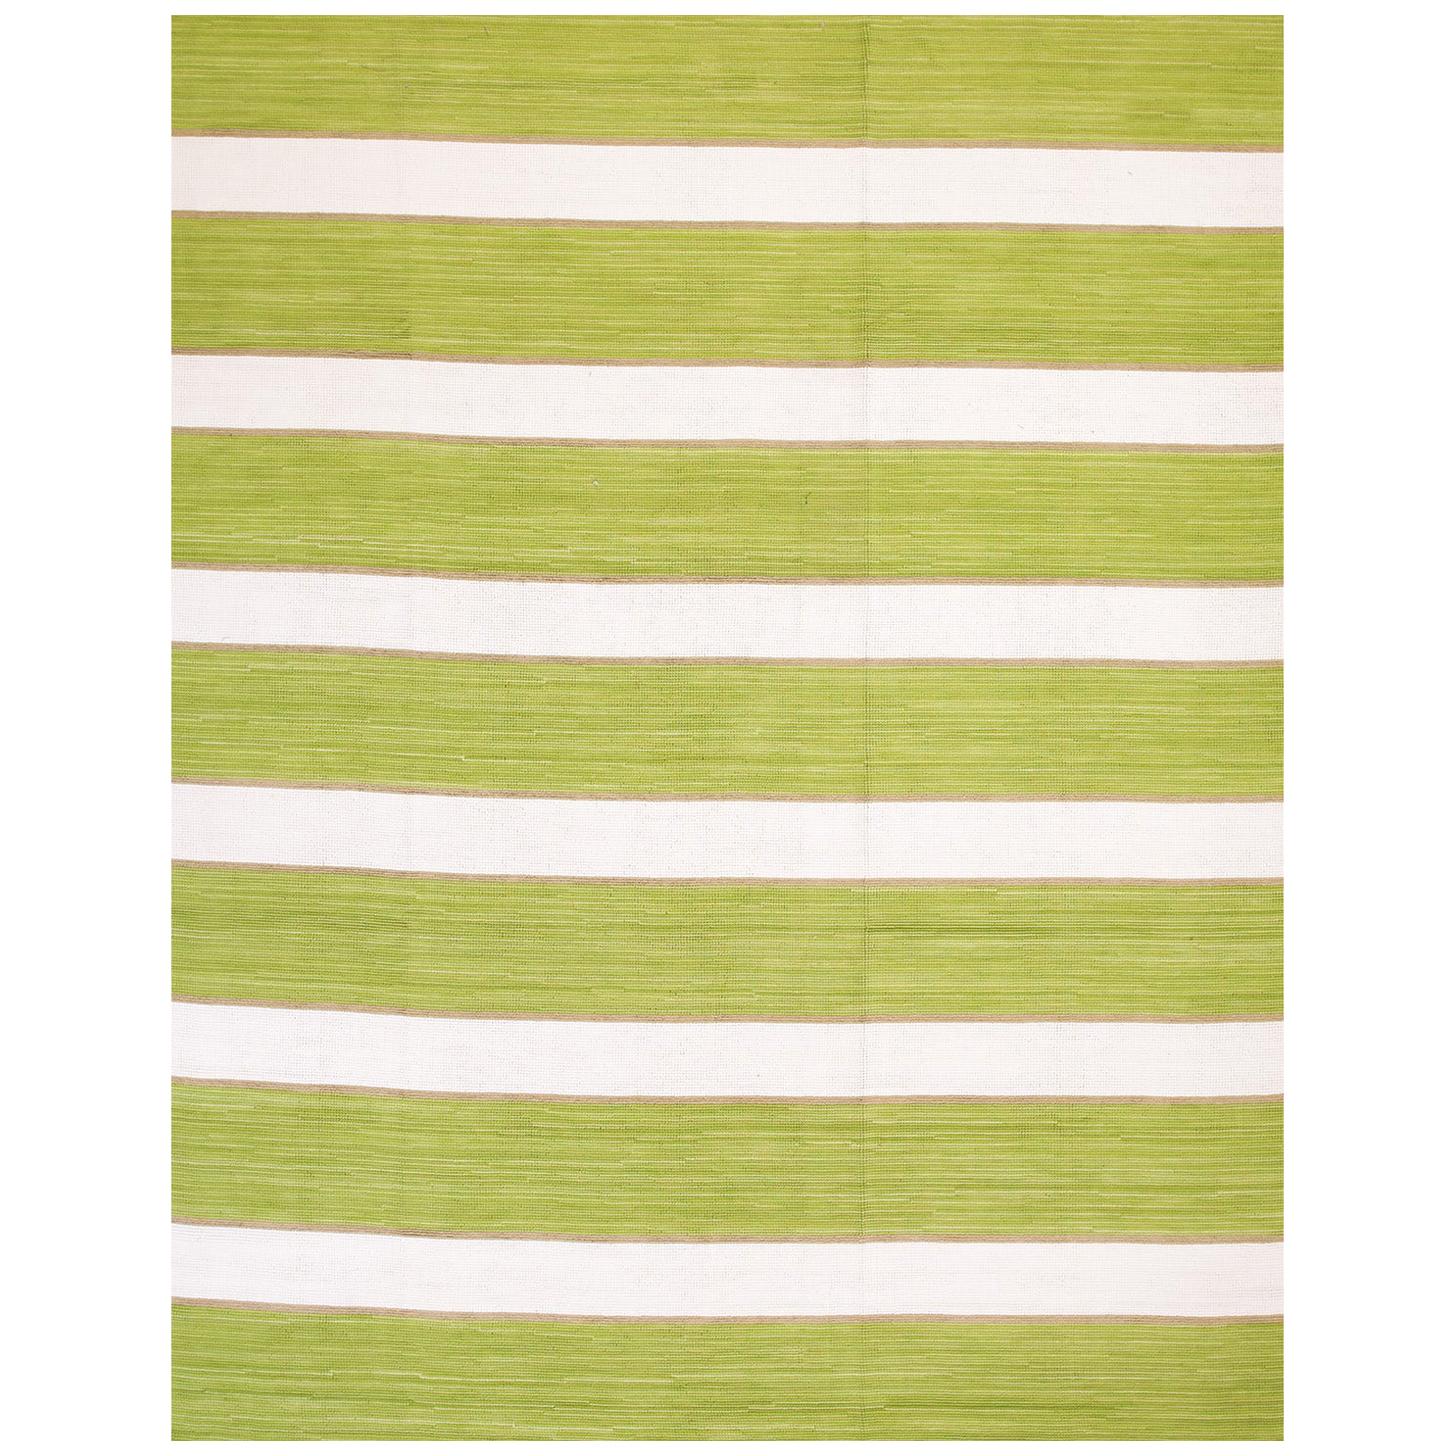 Contemporary American Hooked Rug (8' x 10' - 243 x 304)